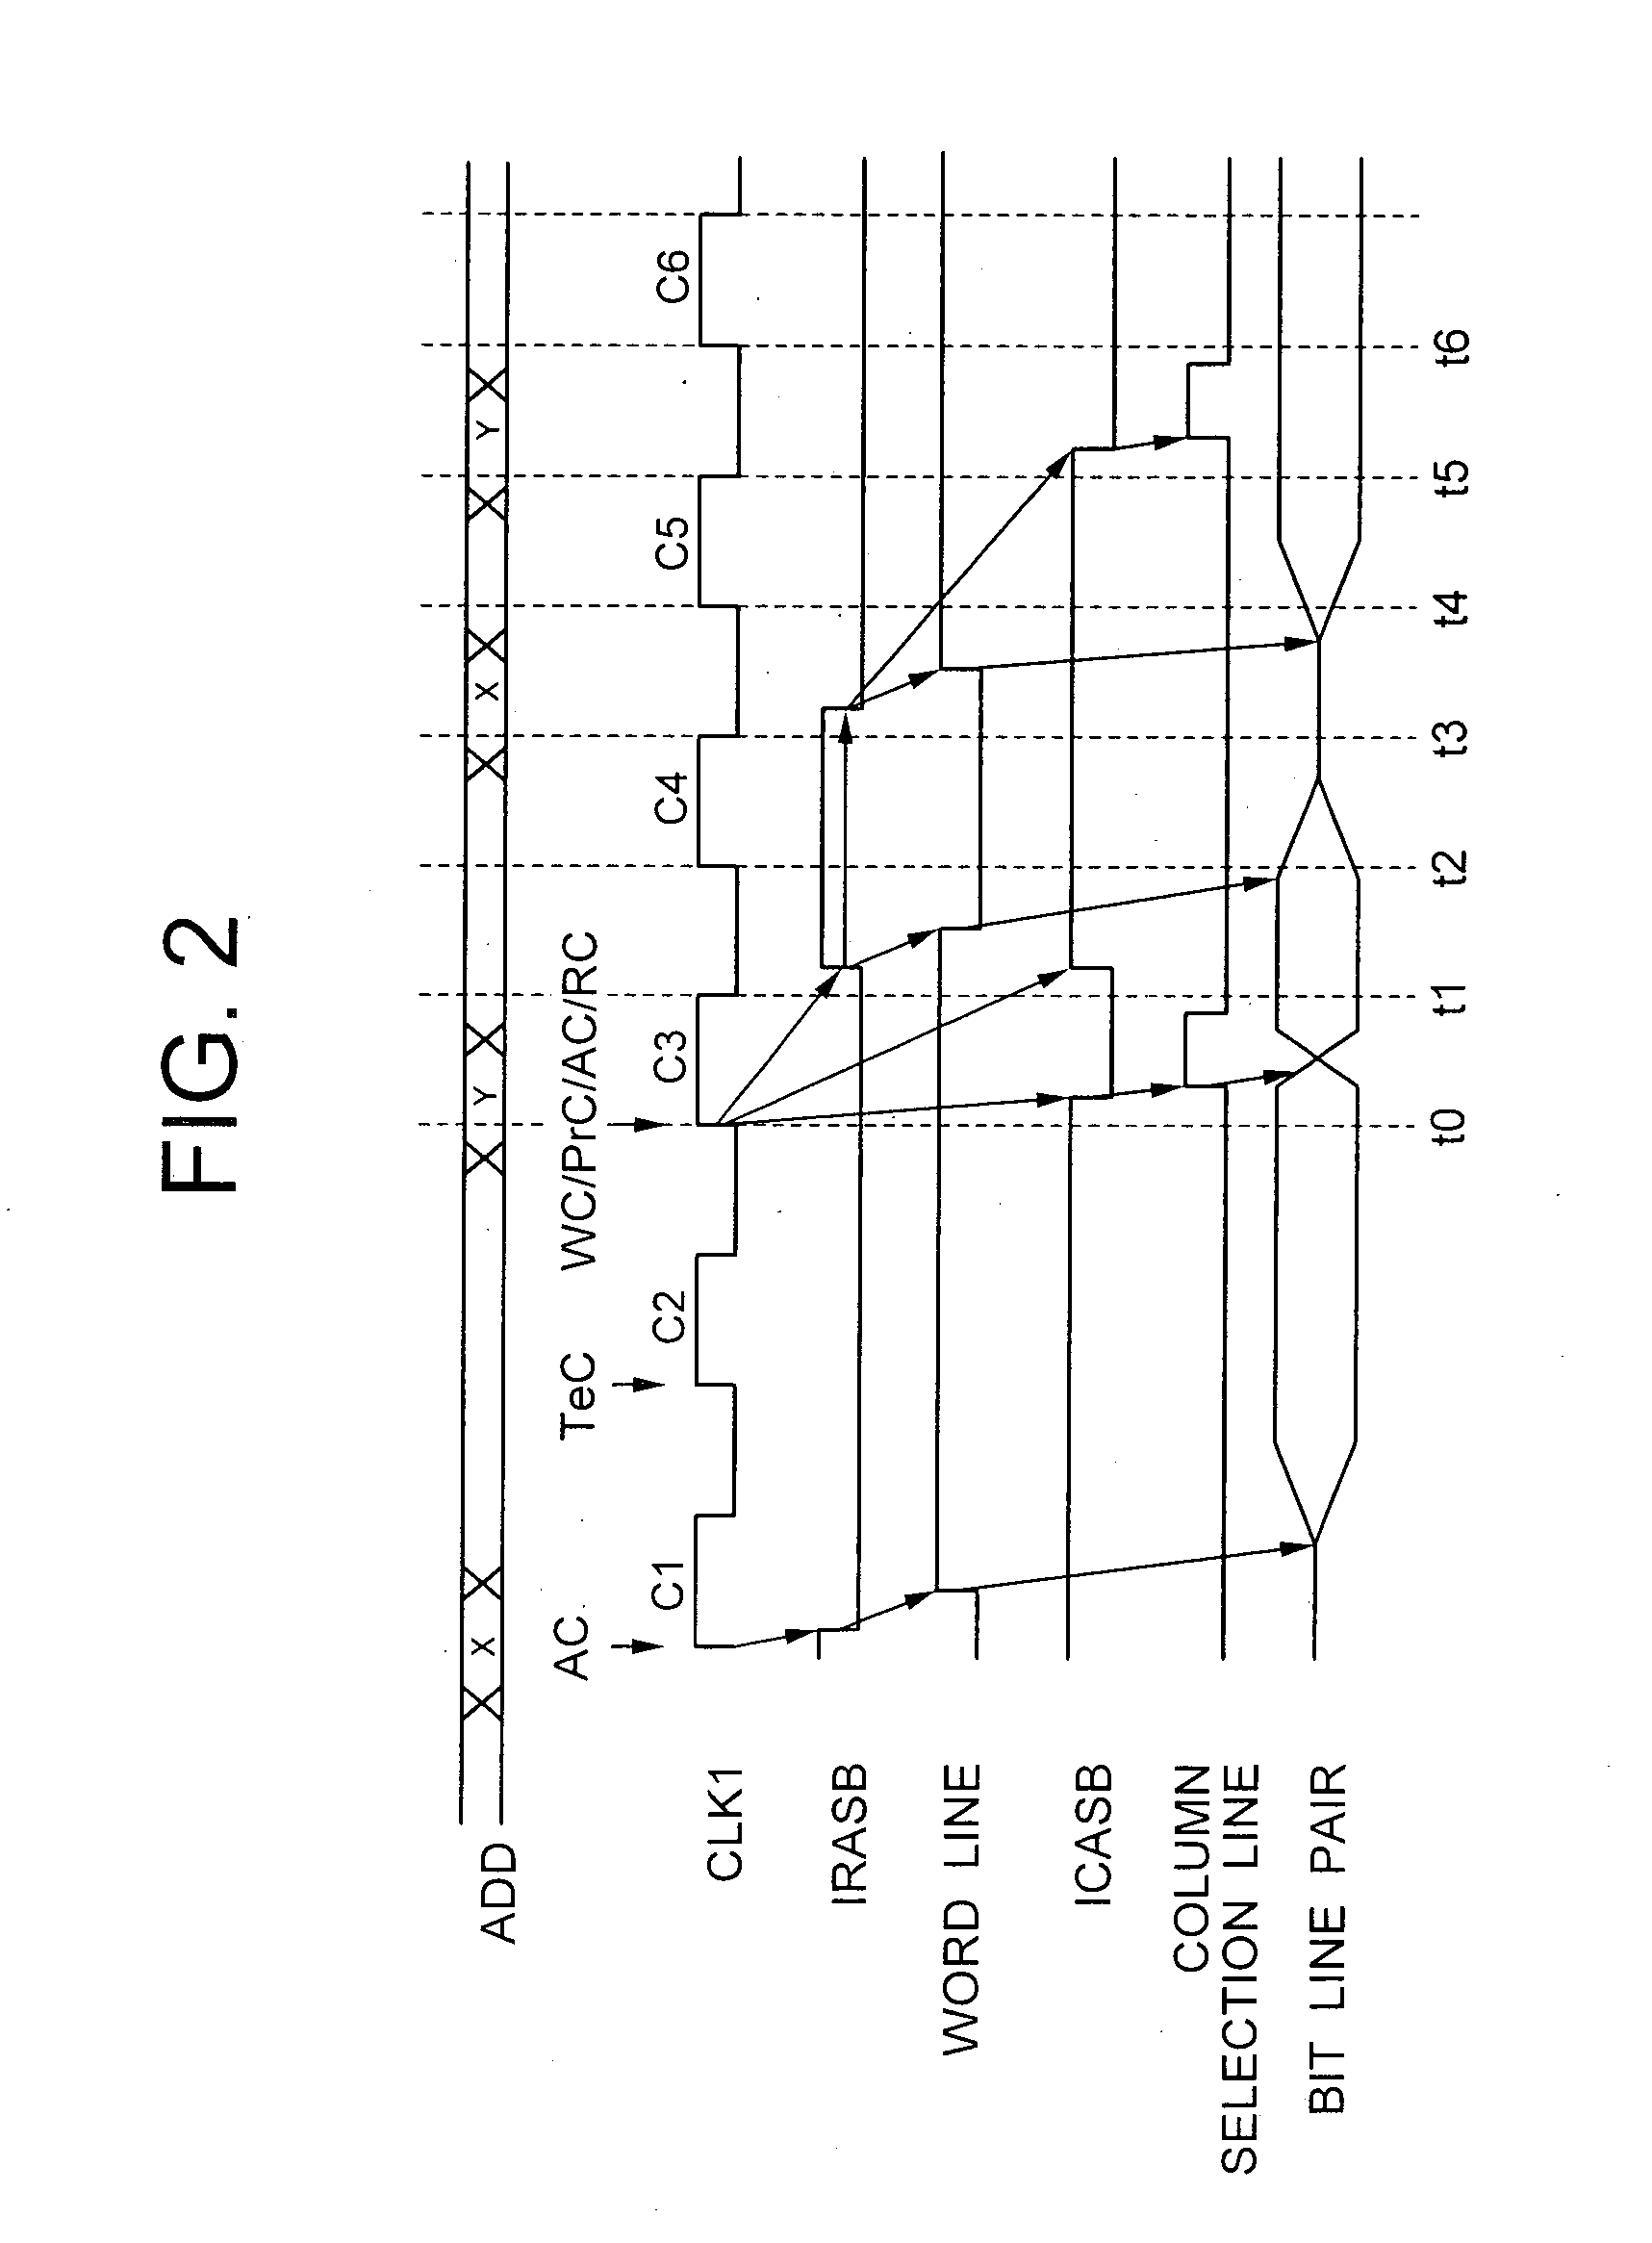 Synchronous semiconductor memory device having a desired-speed test mode